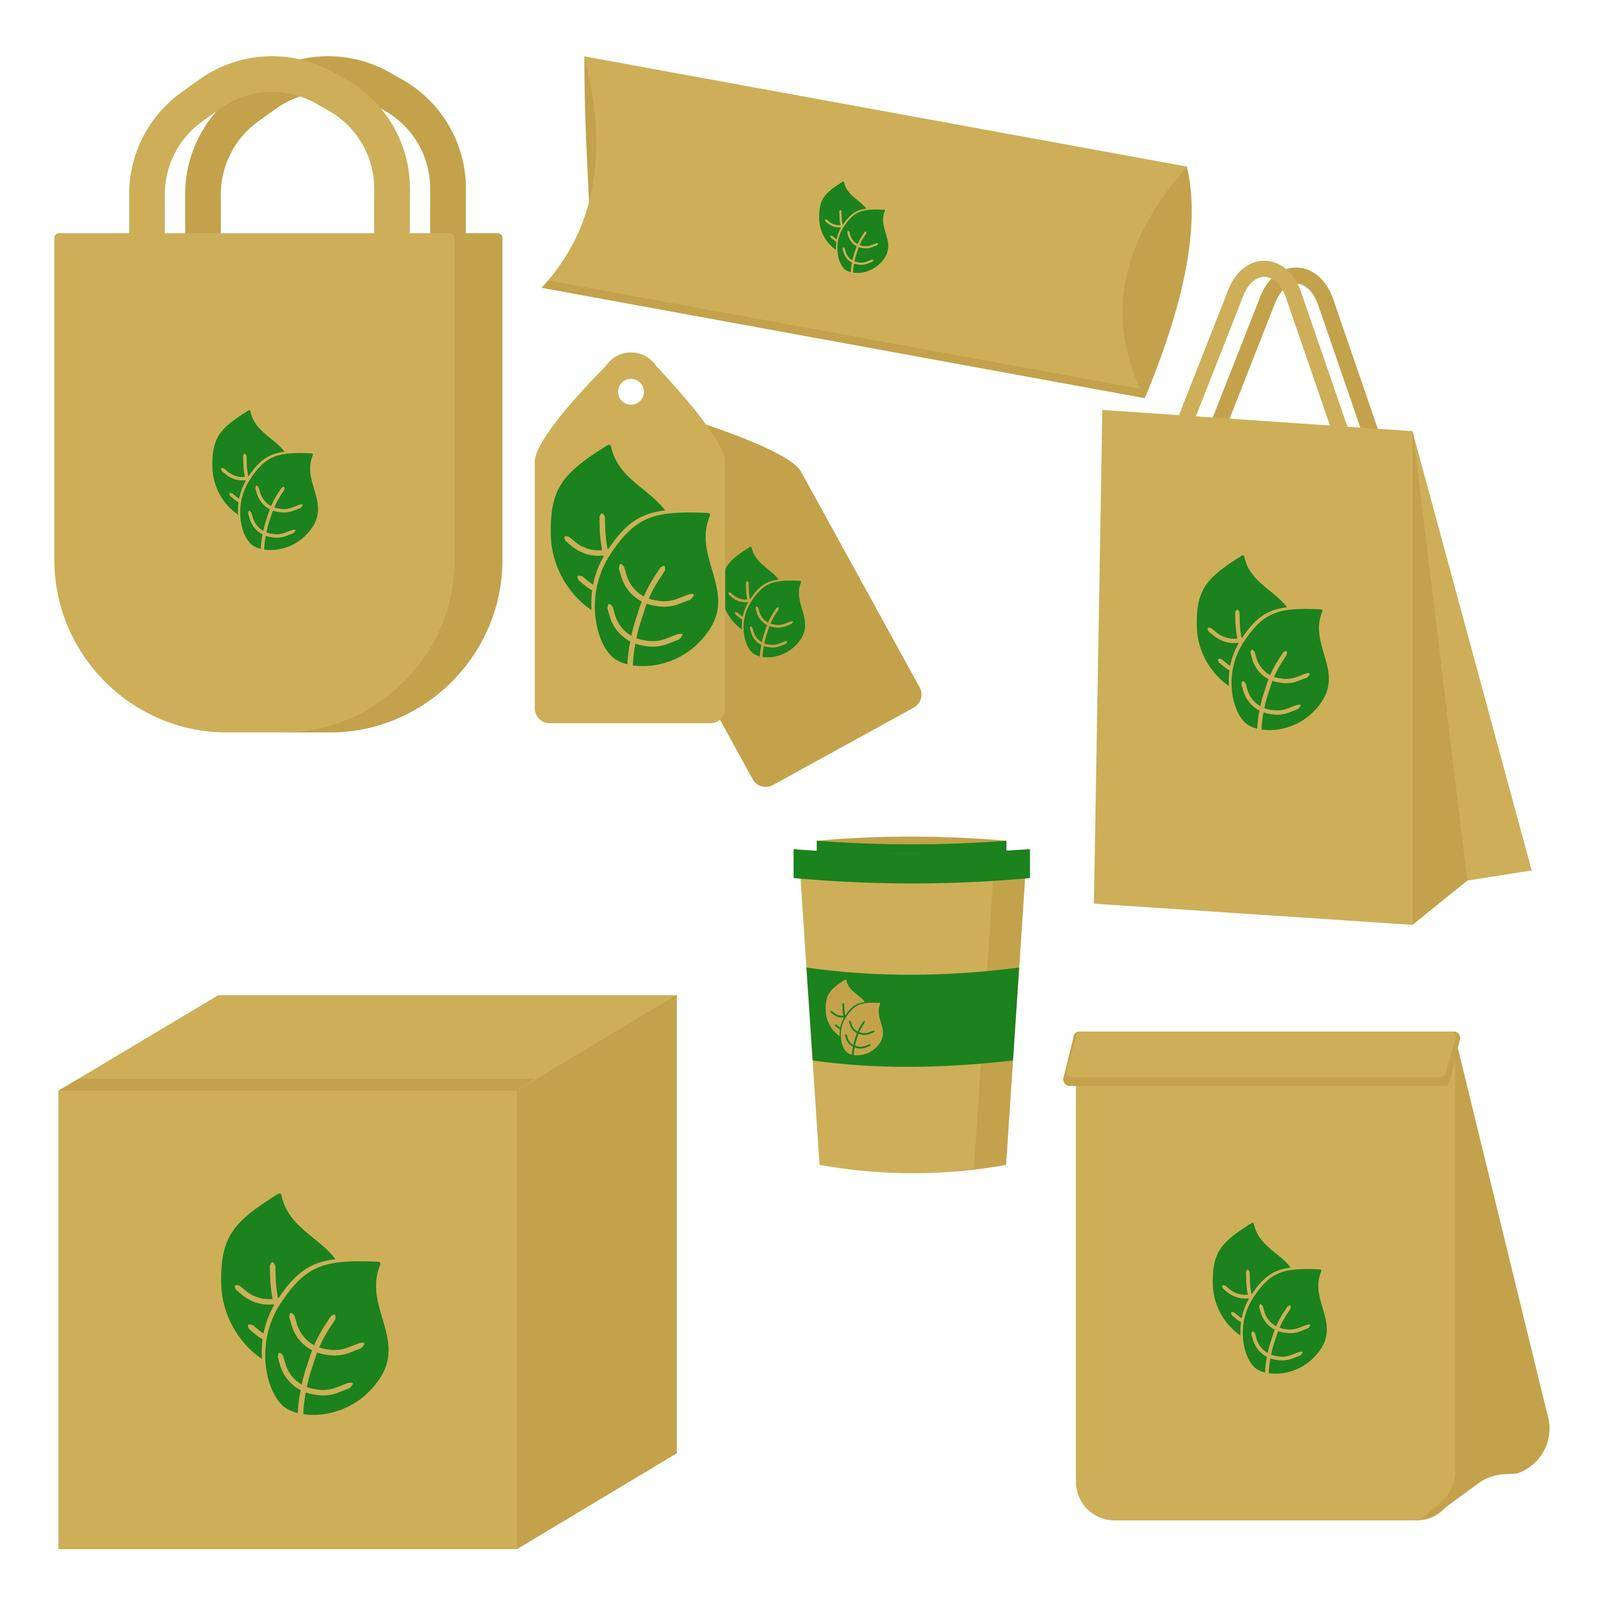 Eco friendly packaging set for various goods, packaging for things and items, shopping bags, brown paper bag, food container and beverage cup in flat style with green leaf symbol by Sunny_Coloring